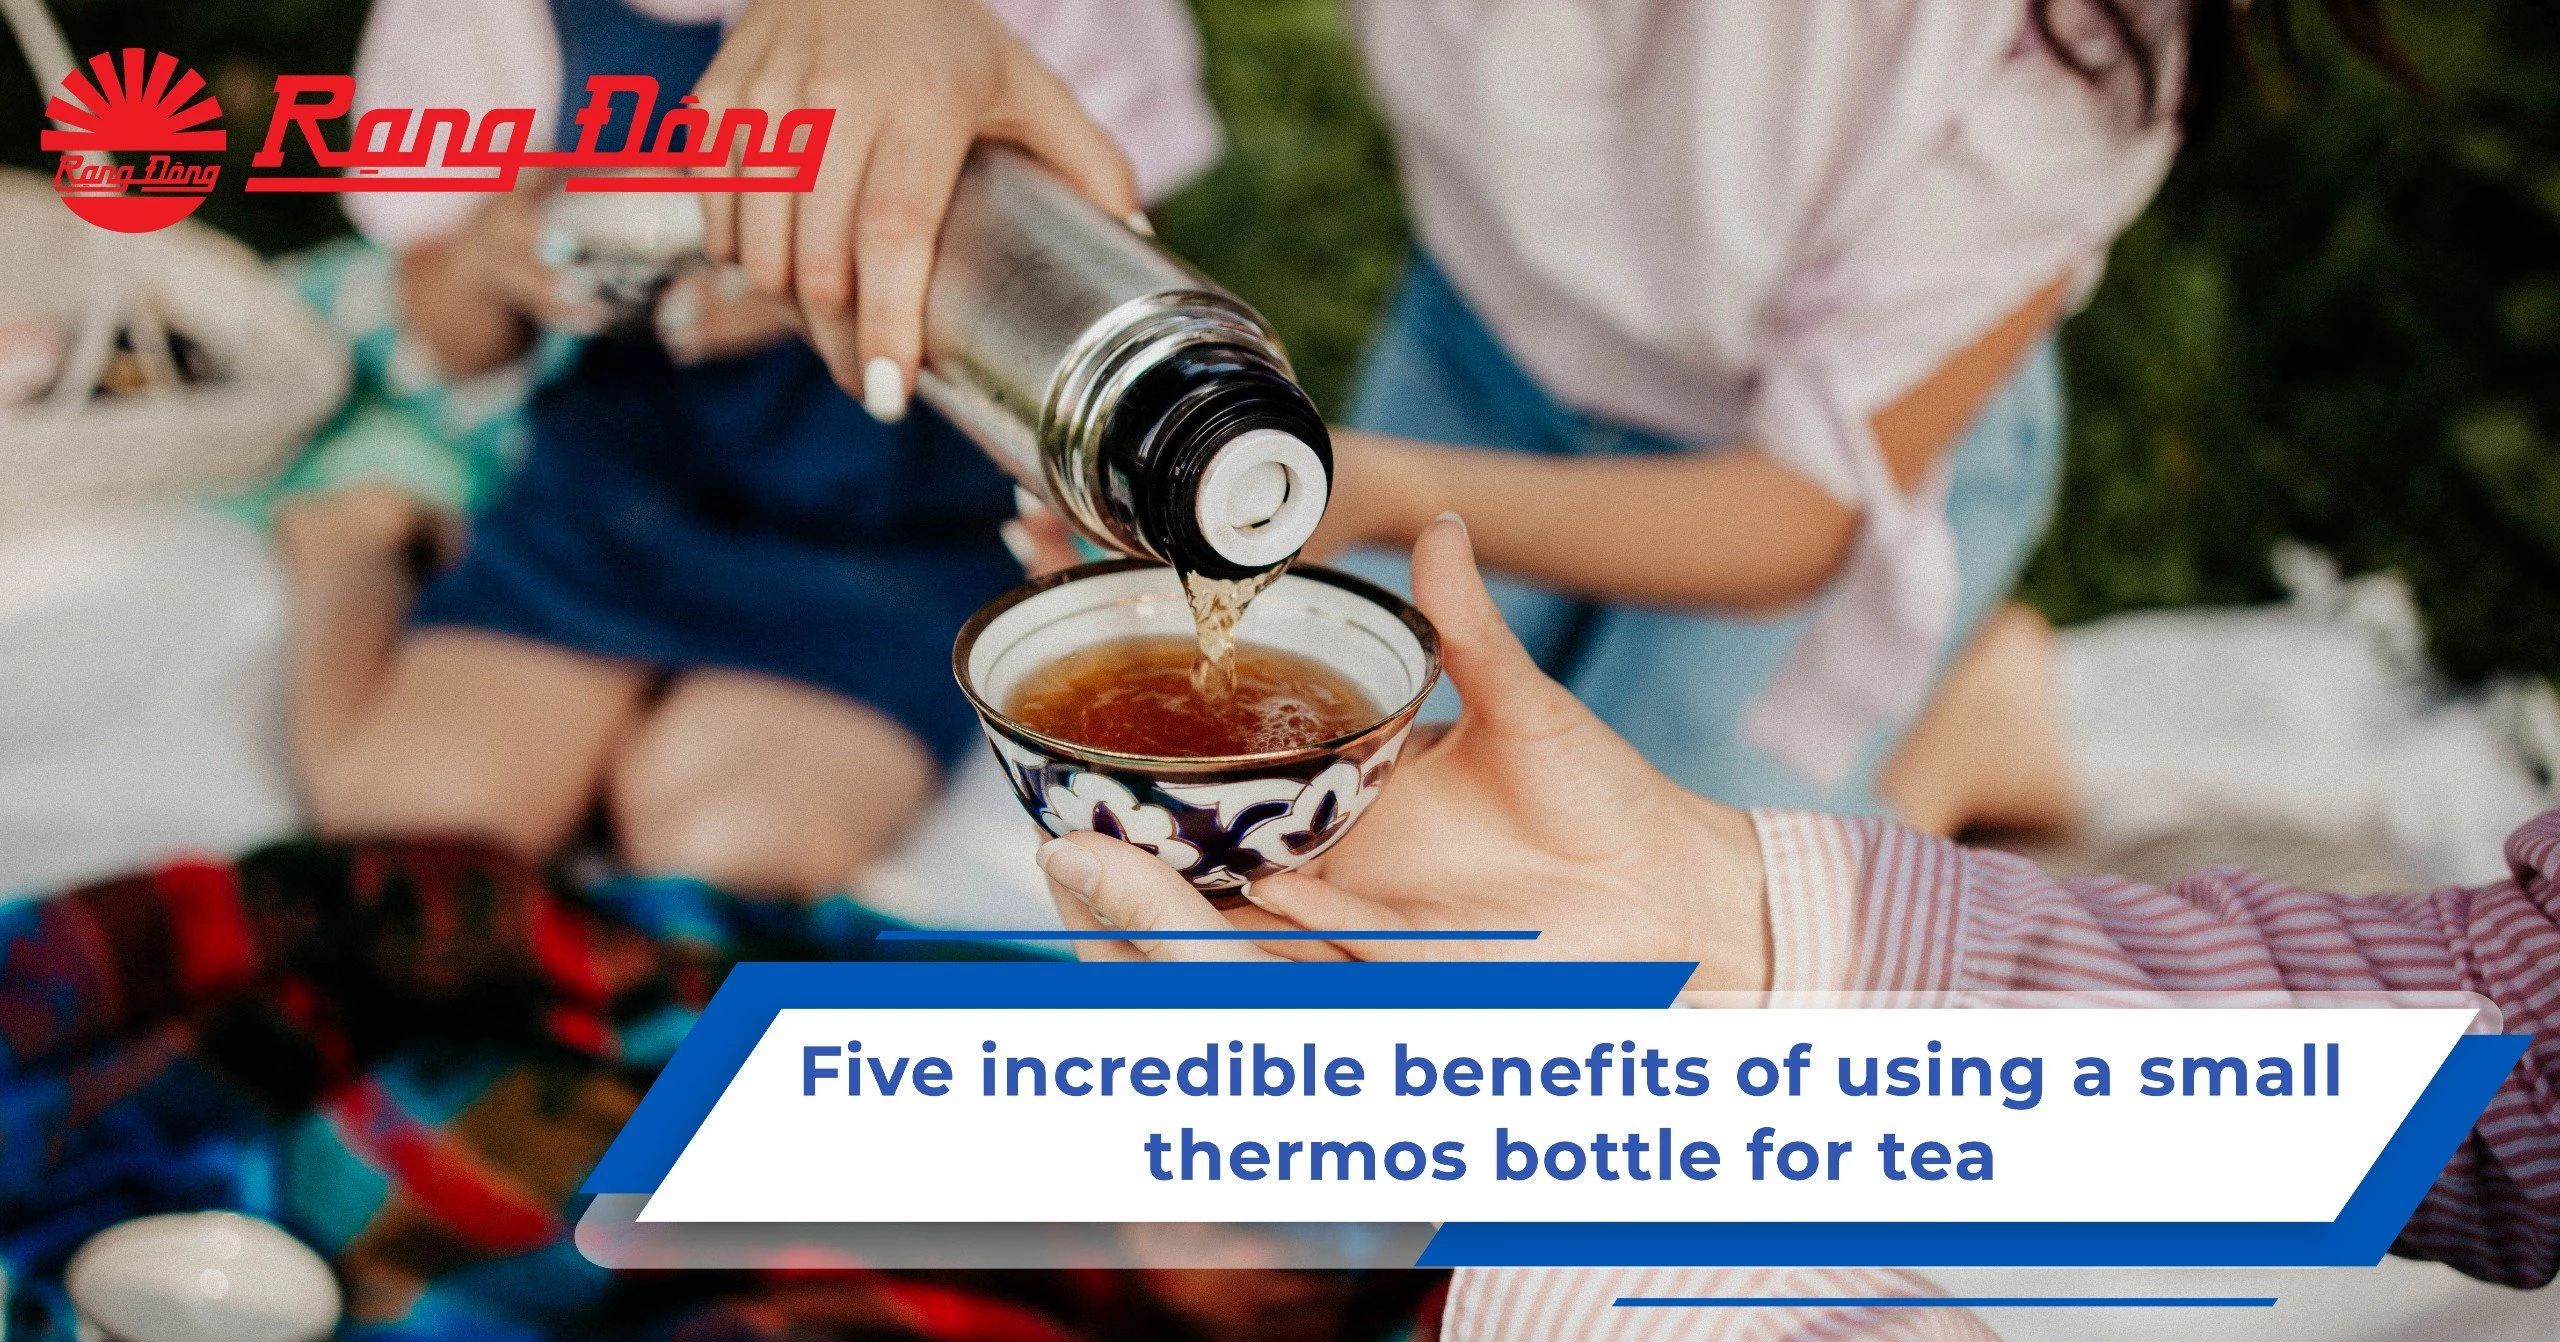 Five incredible benefits from small thermos bottle for tea